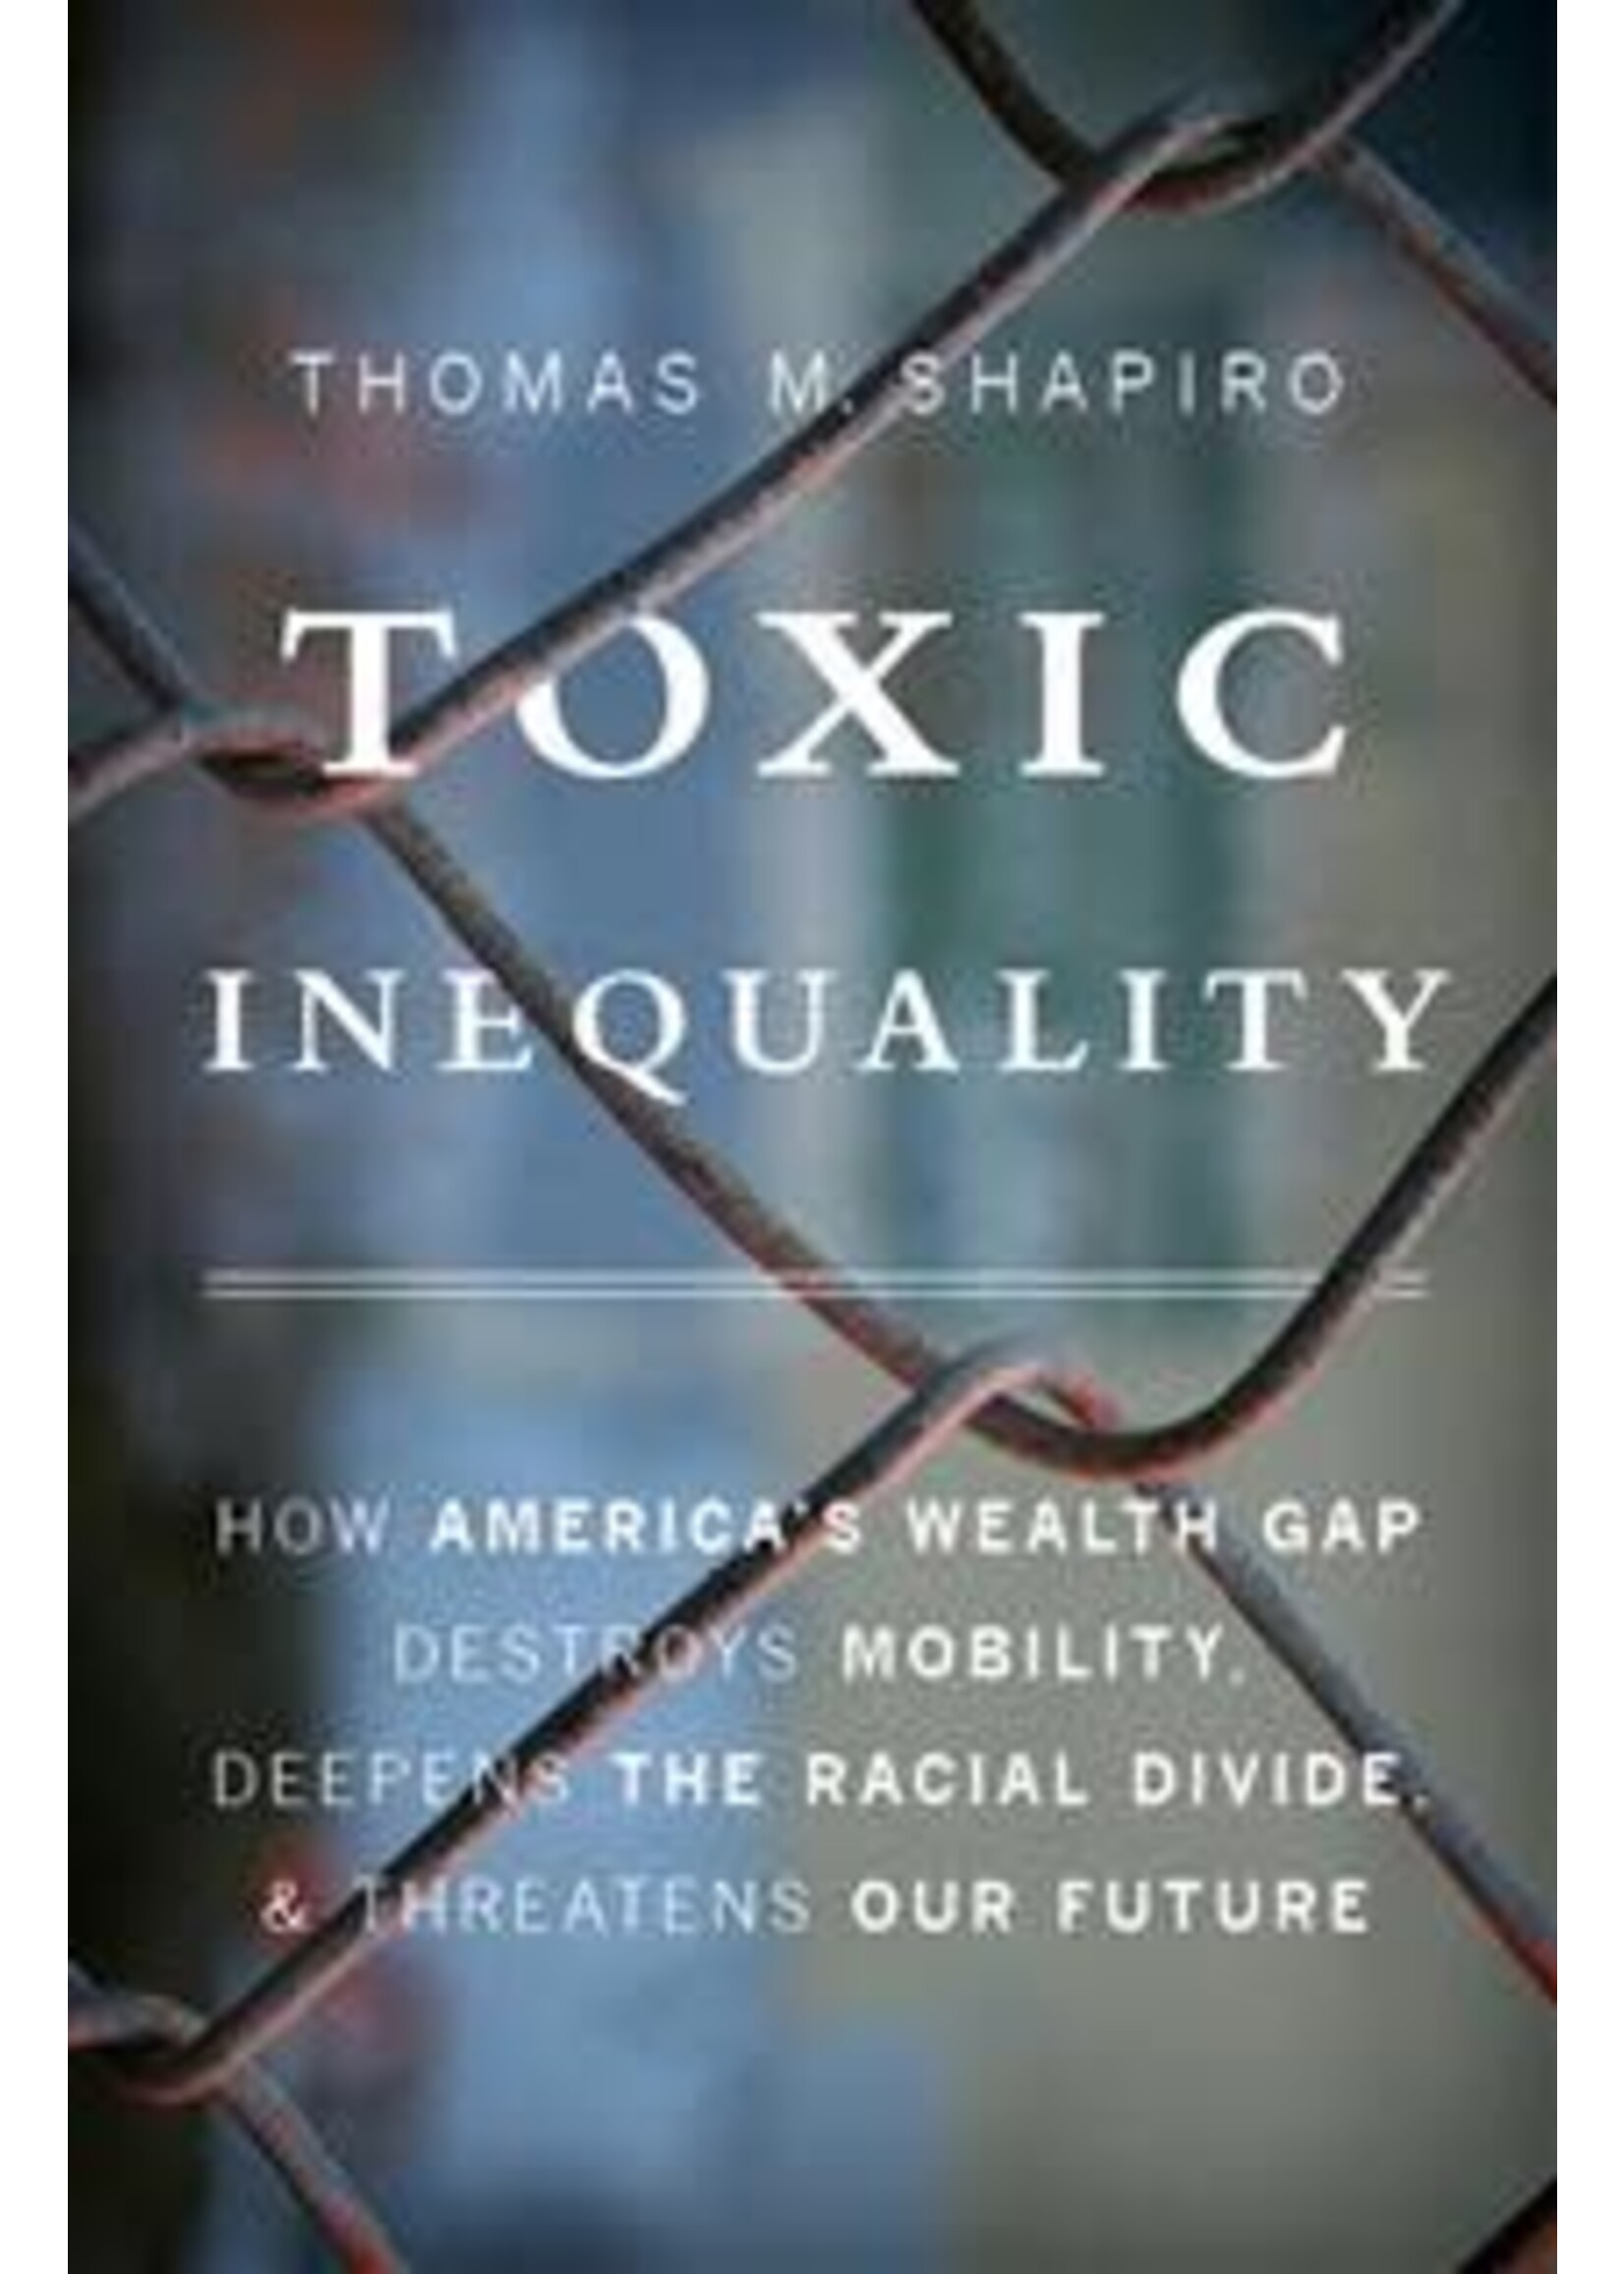 Toxic Inequality: How America's Wealth Gap Destroys Mobility, Deepens the Racial Divide, and Threatens Our Future by Thomas M. Shapiro